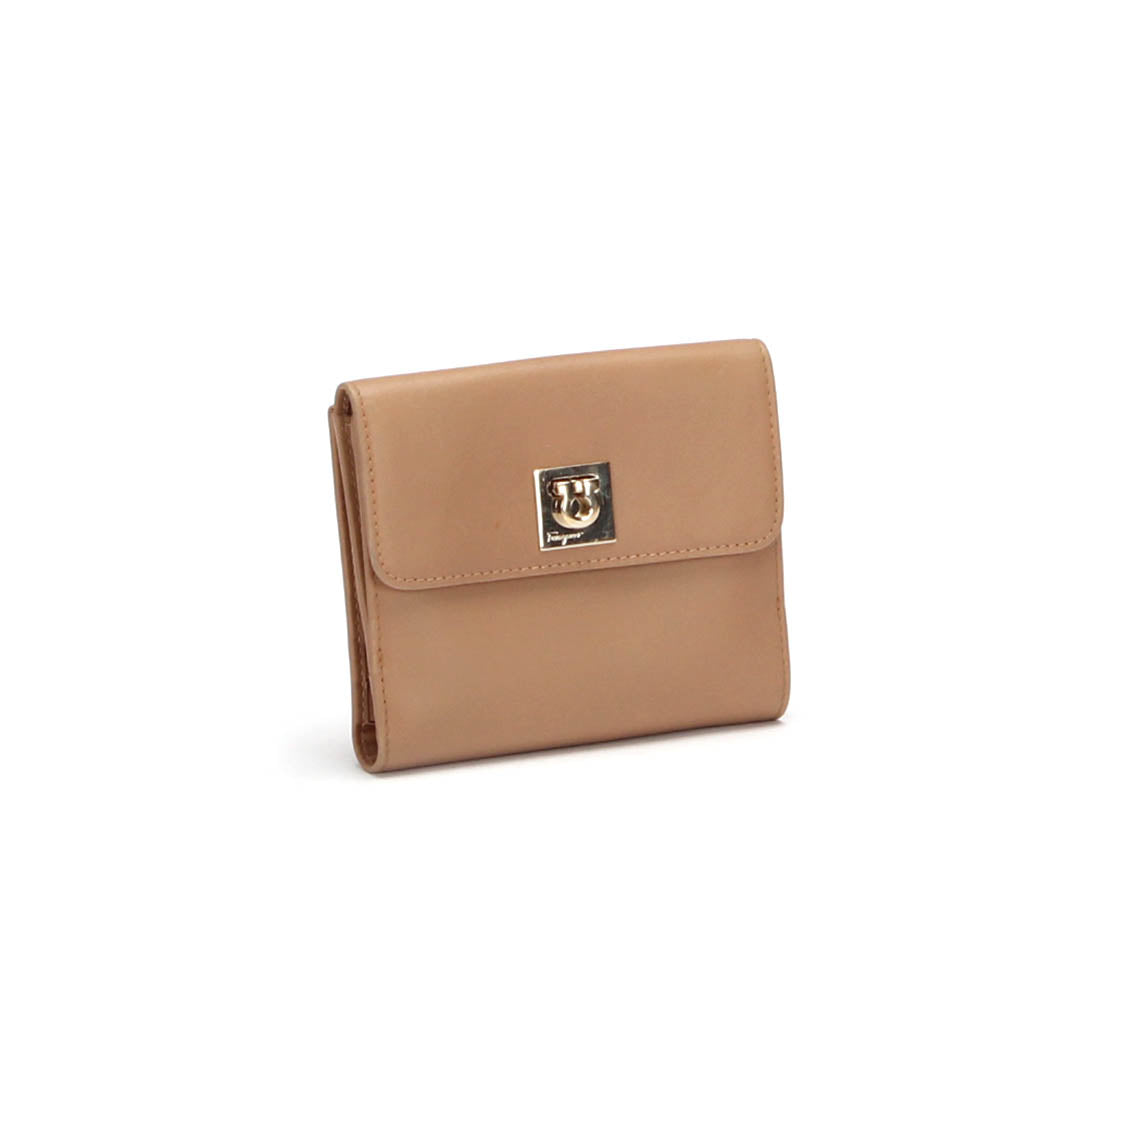 Gancini Leather Small Wallet